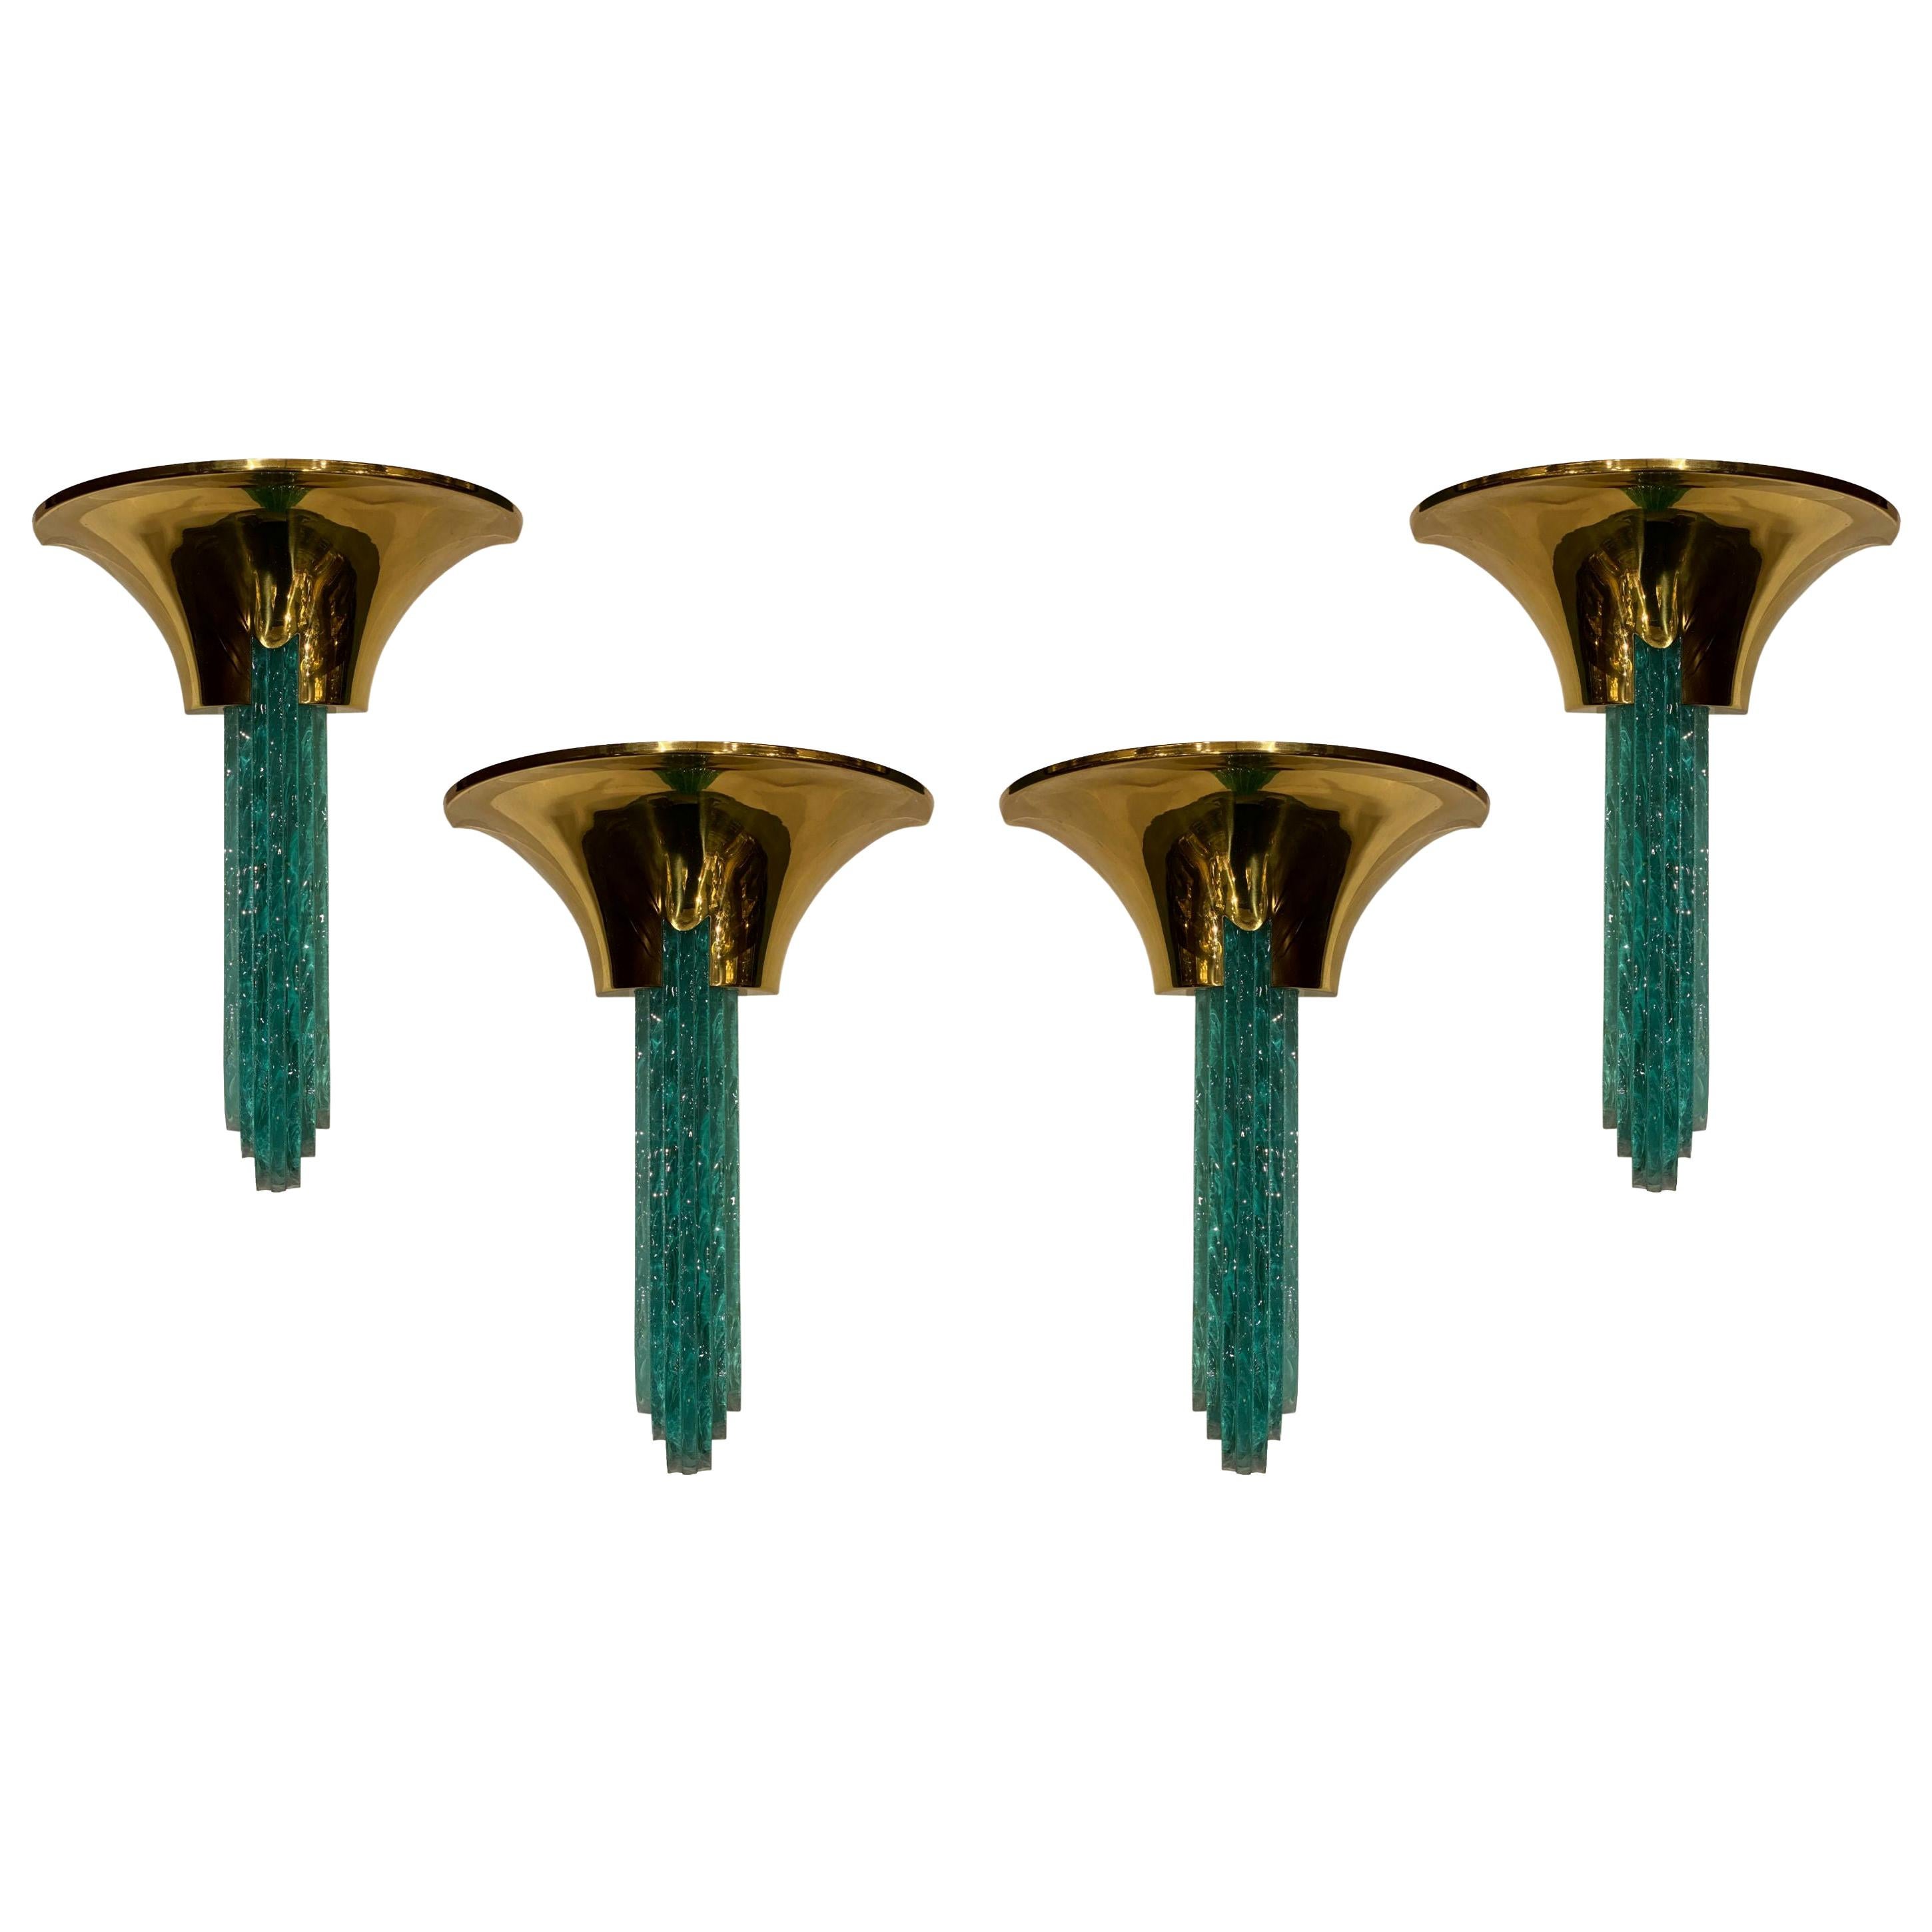 Four  mid century  polished  Brass and Glass Sconces Attributed to Karl Springer